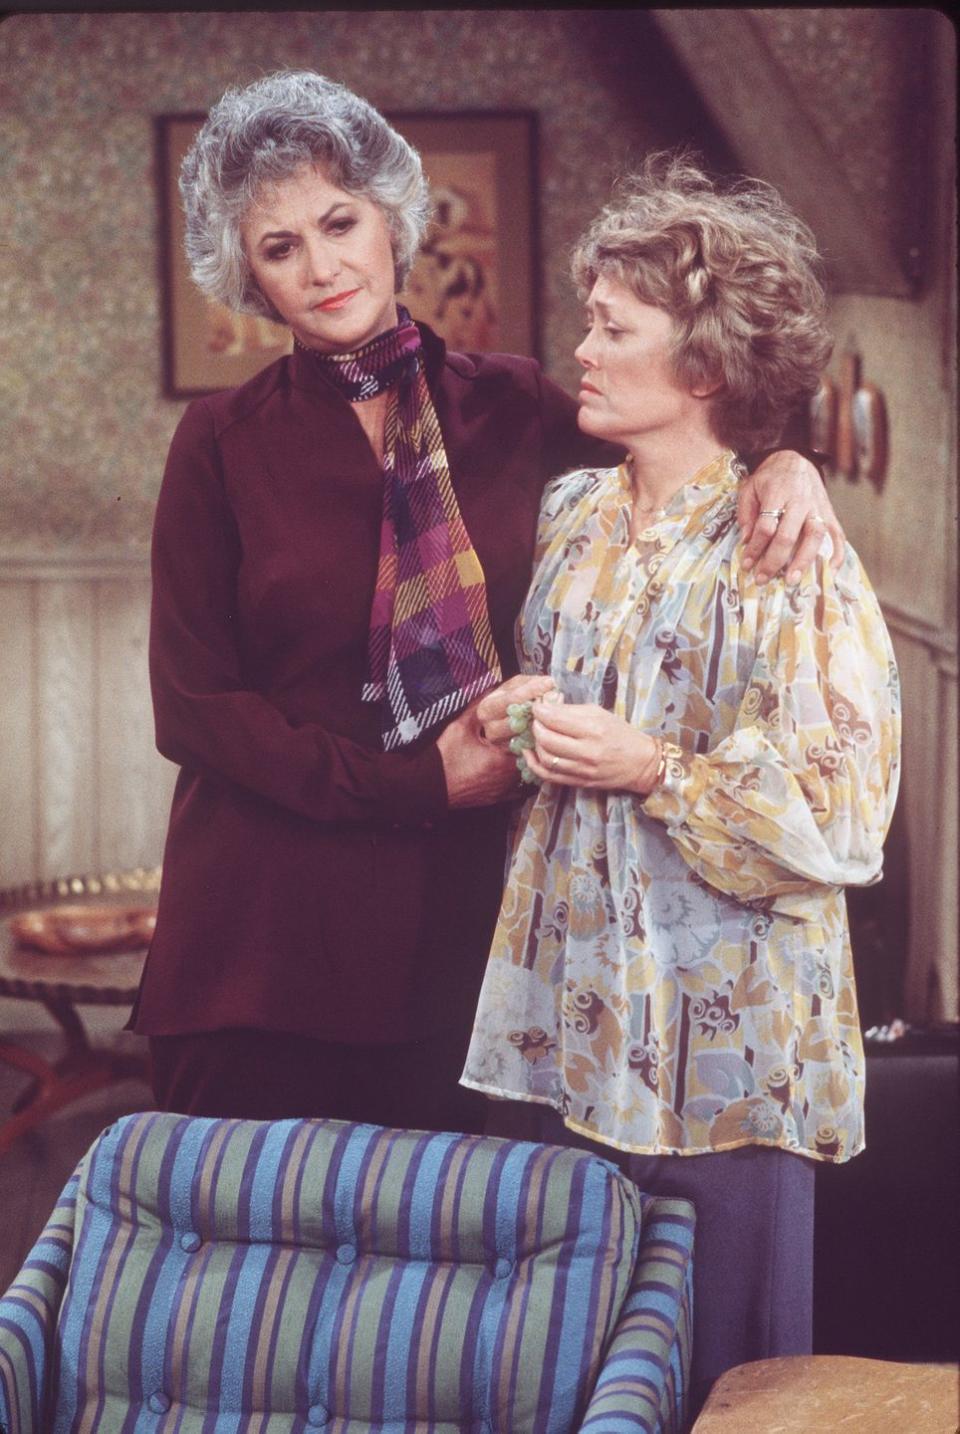 Rue McClanahan and Bea Arthur also acted together before 'The Golden Girls.'